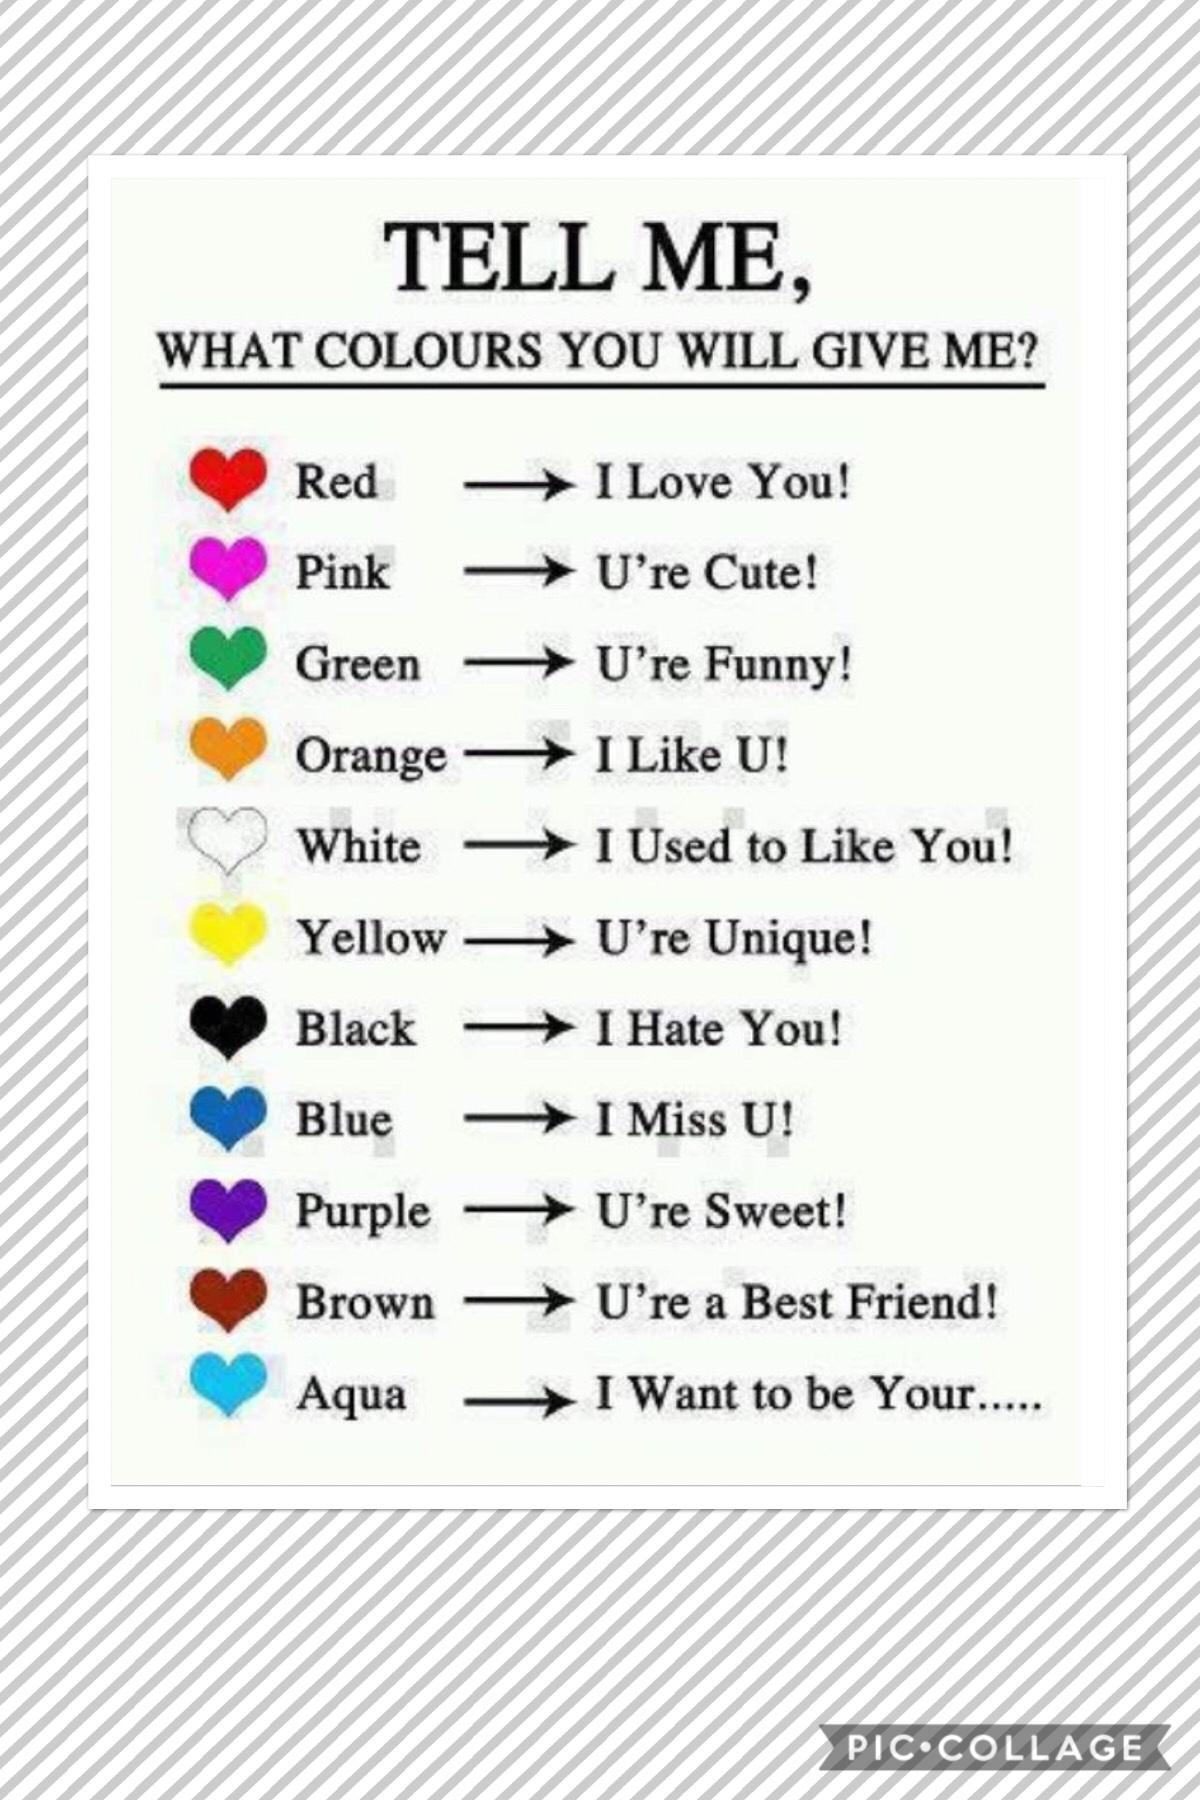 What color will you give me 